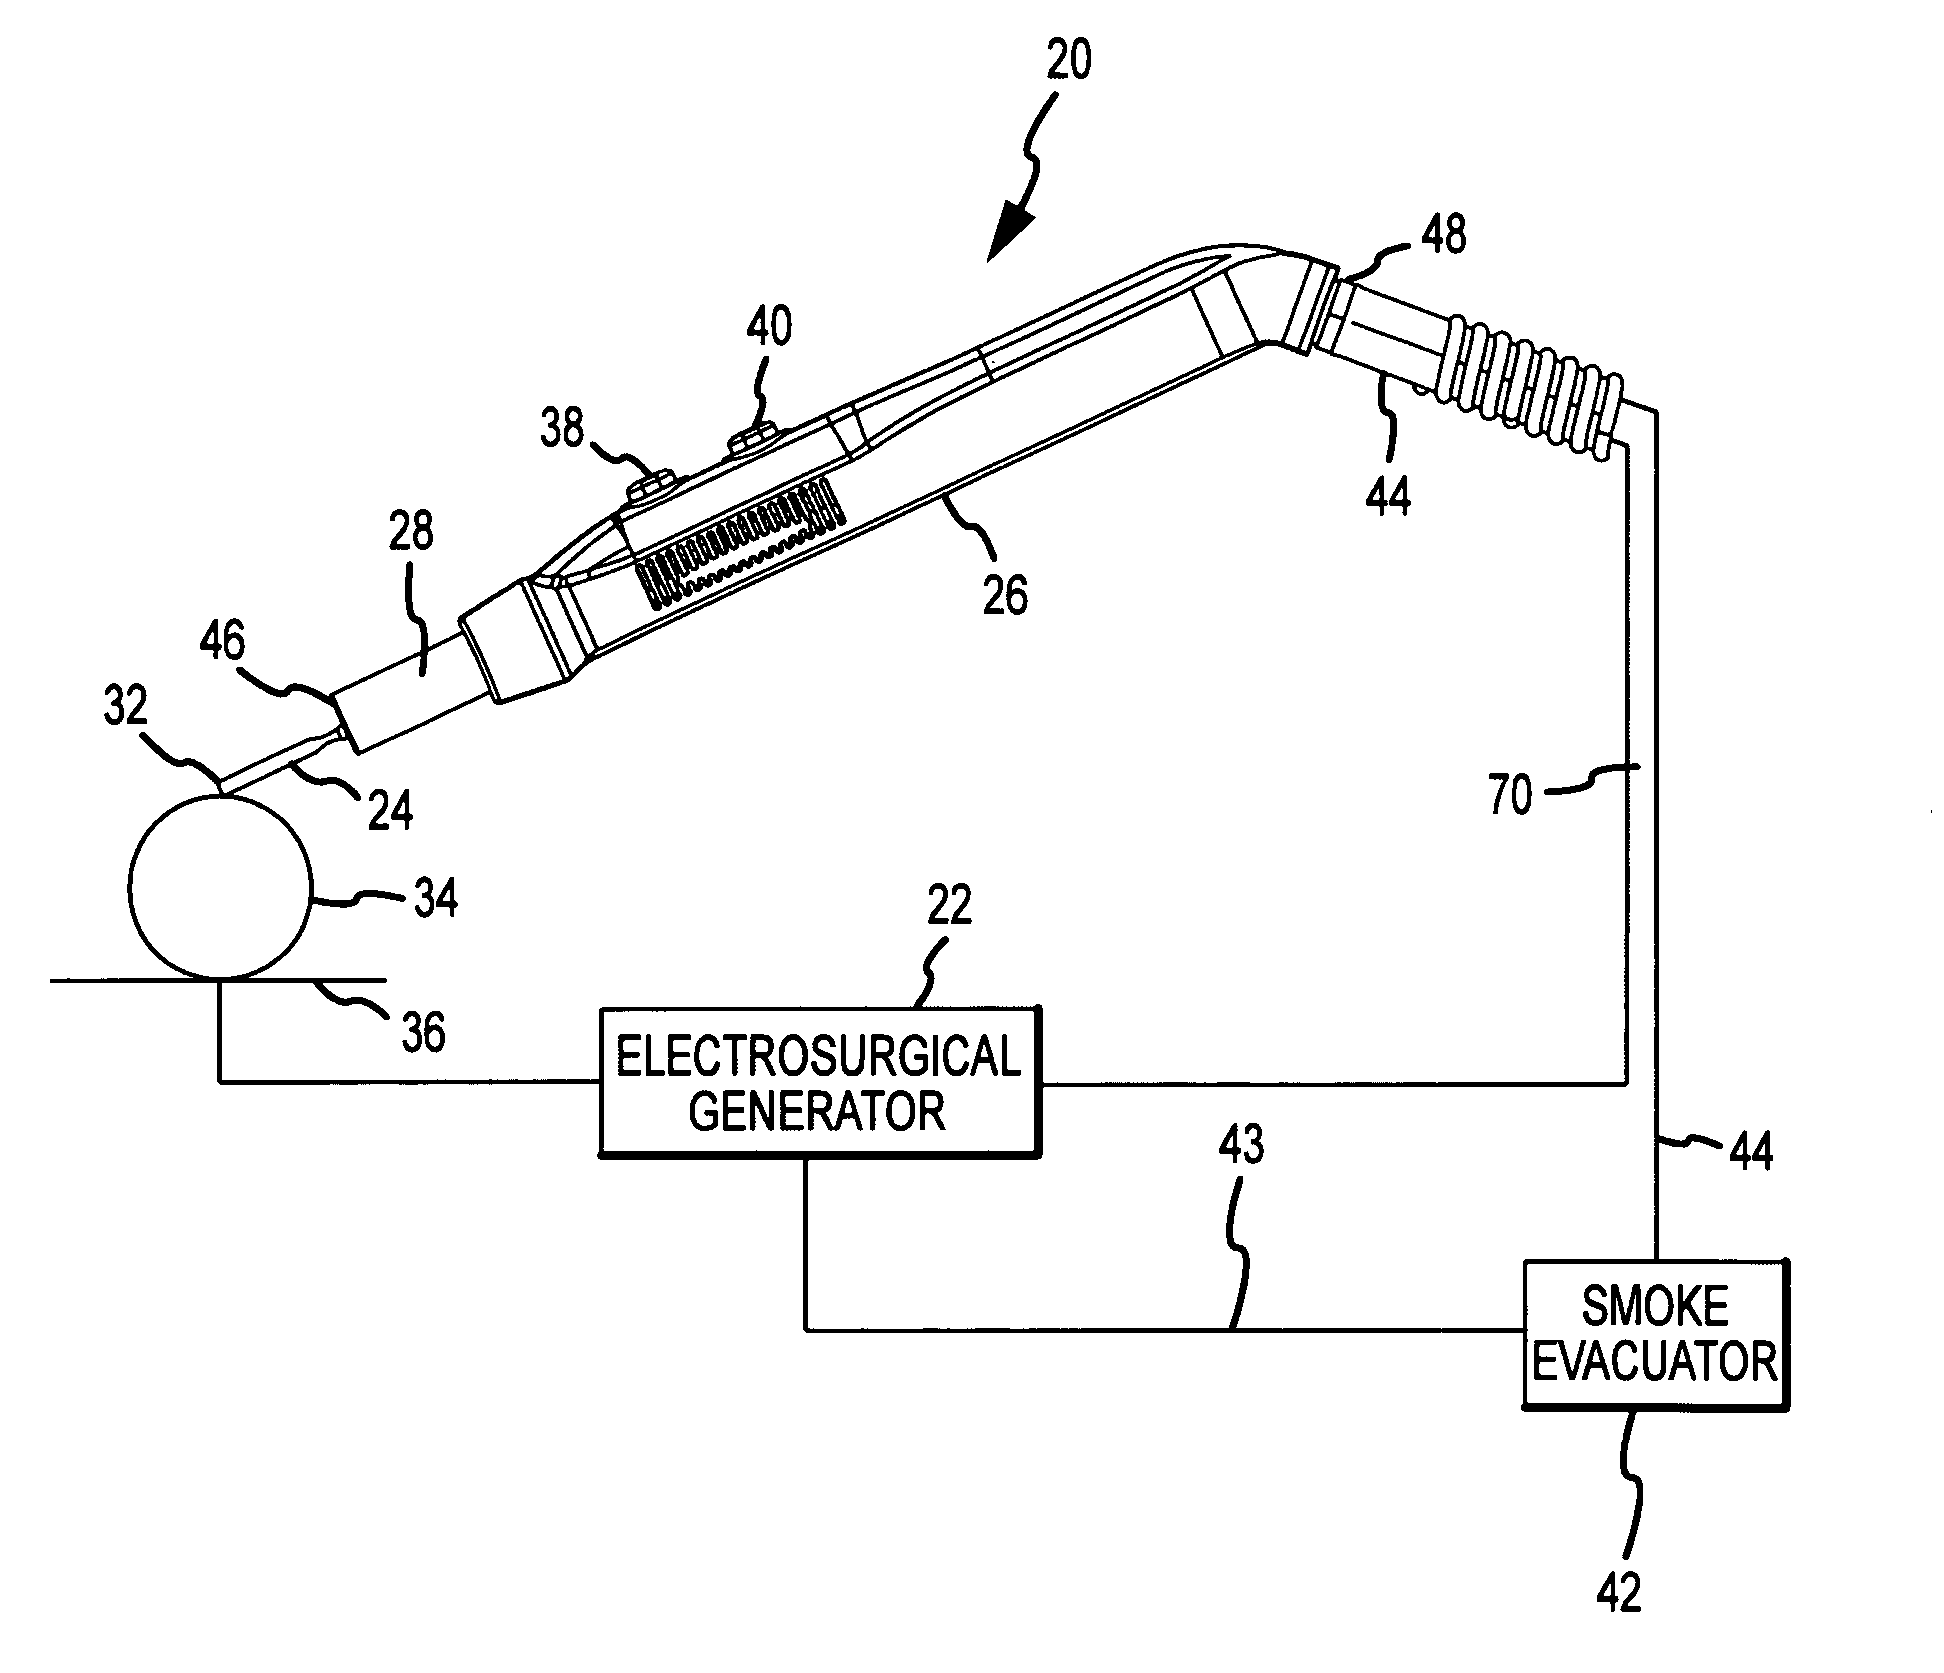 Integrated smoke evacuation electrosurgical pencil and method